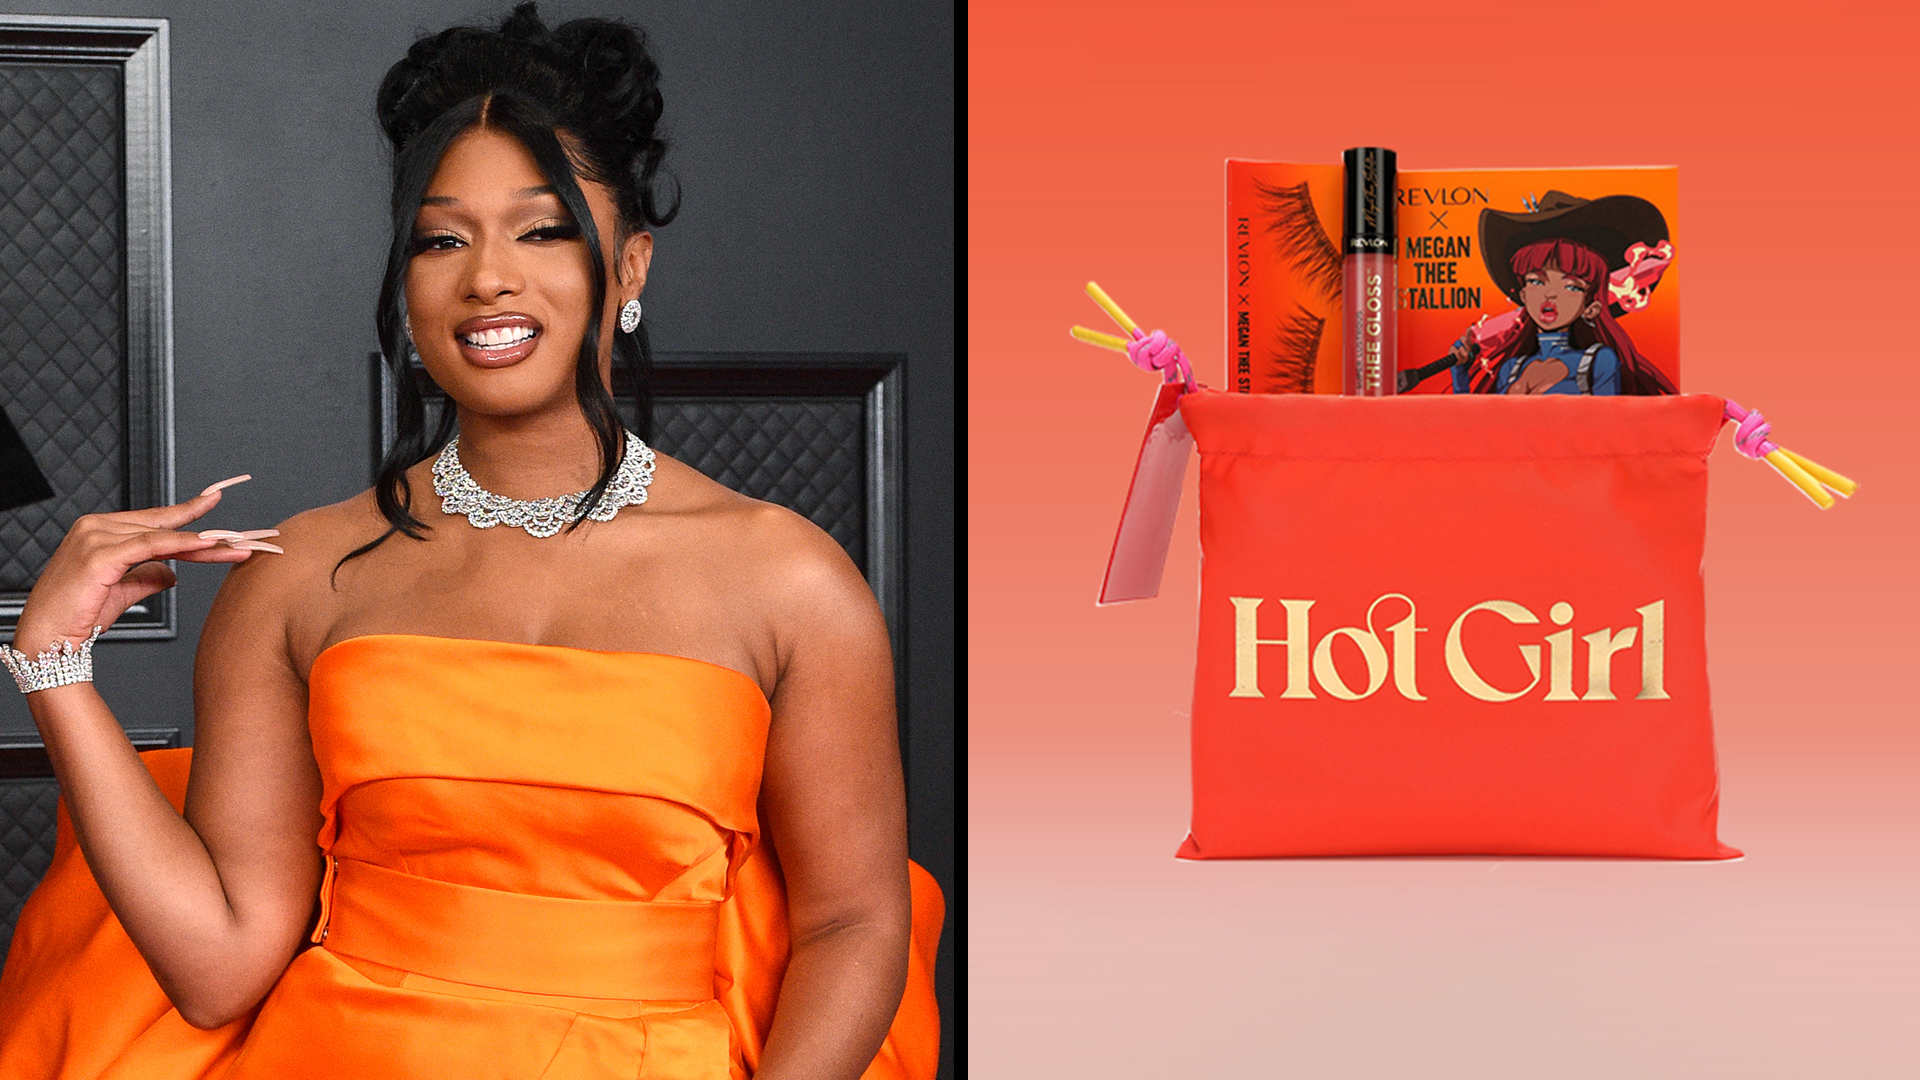 Megan Thee Stallion's Revlon Collection, StockX's First-Ever Beauty Drop, Sells Out In Less Than 24 Hours